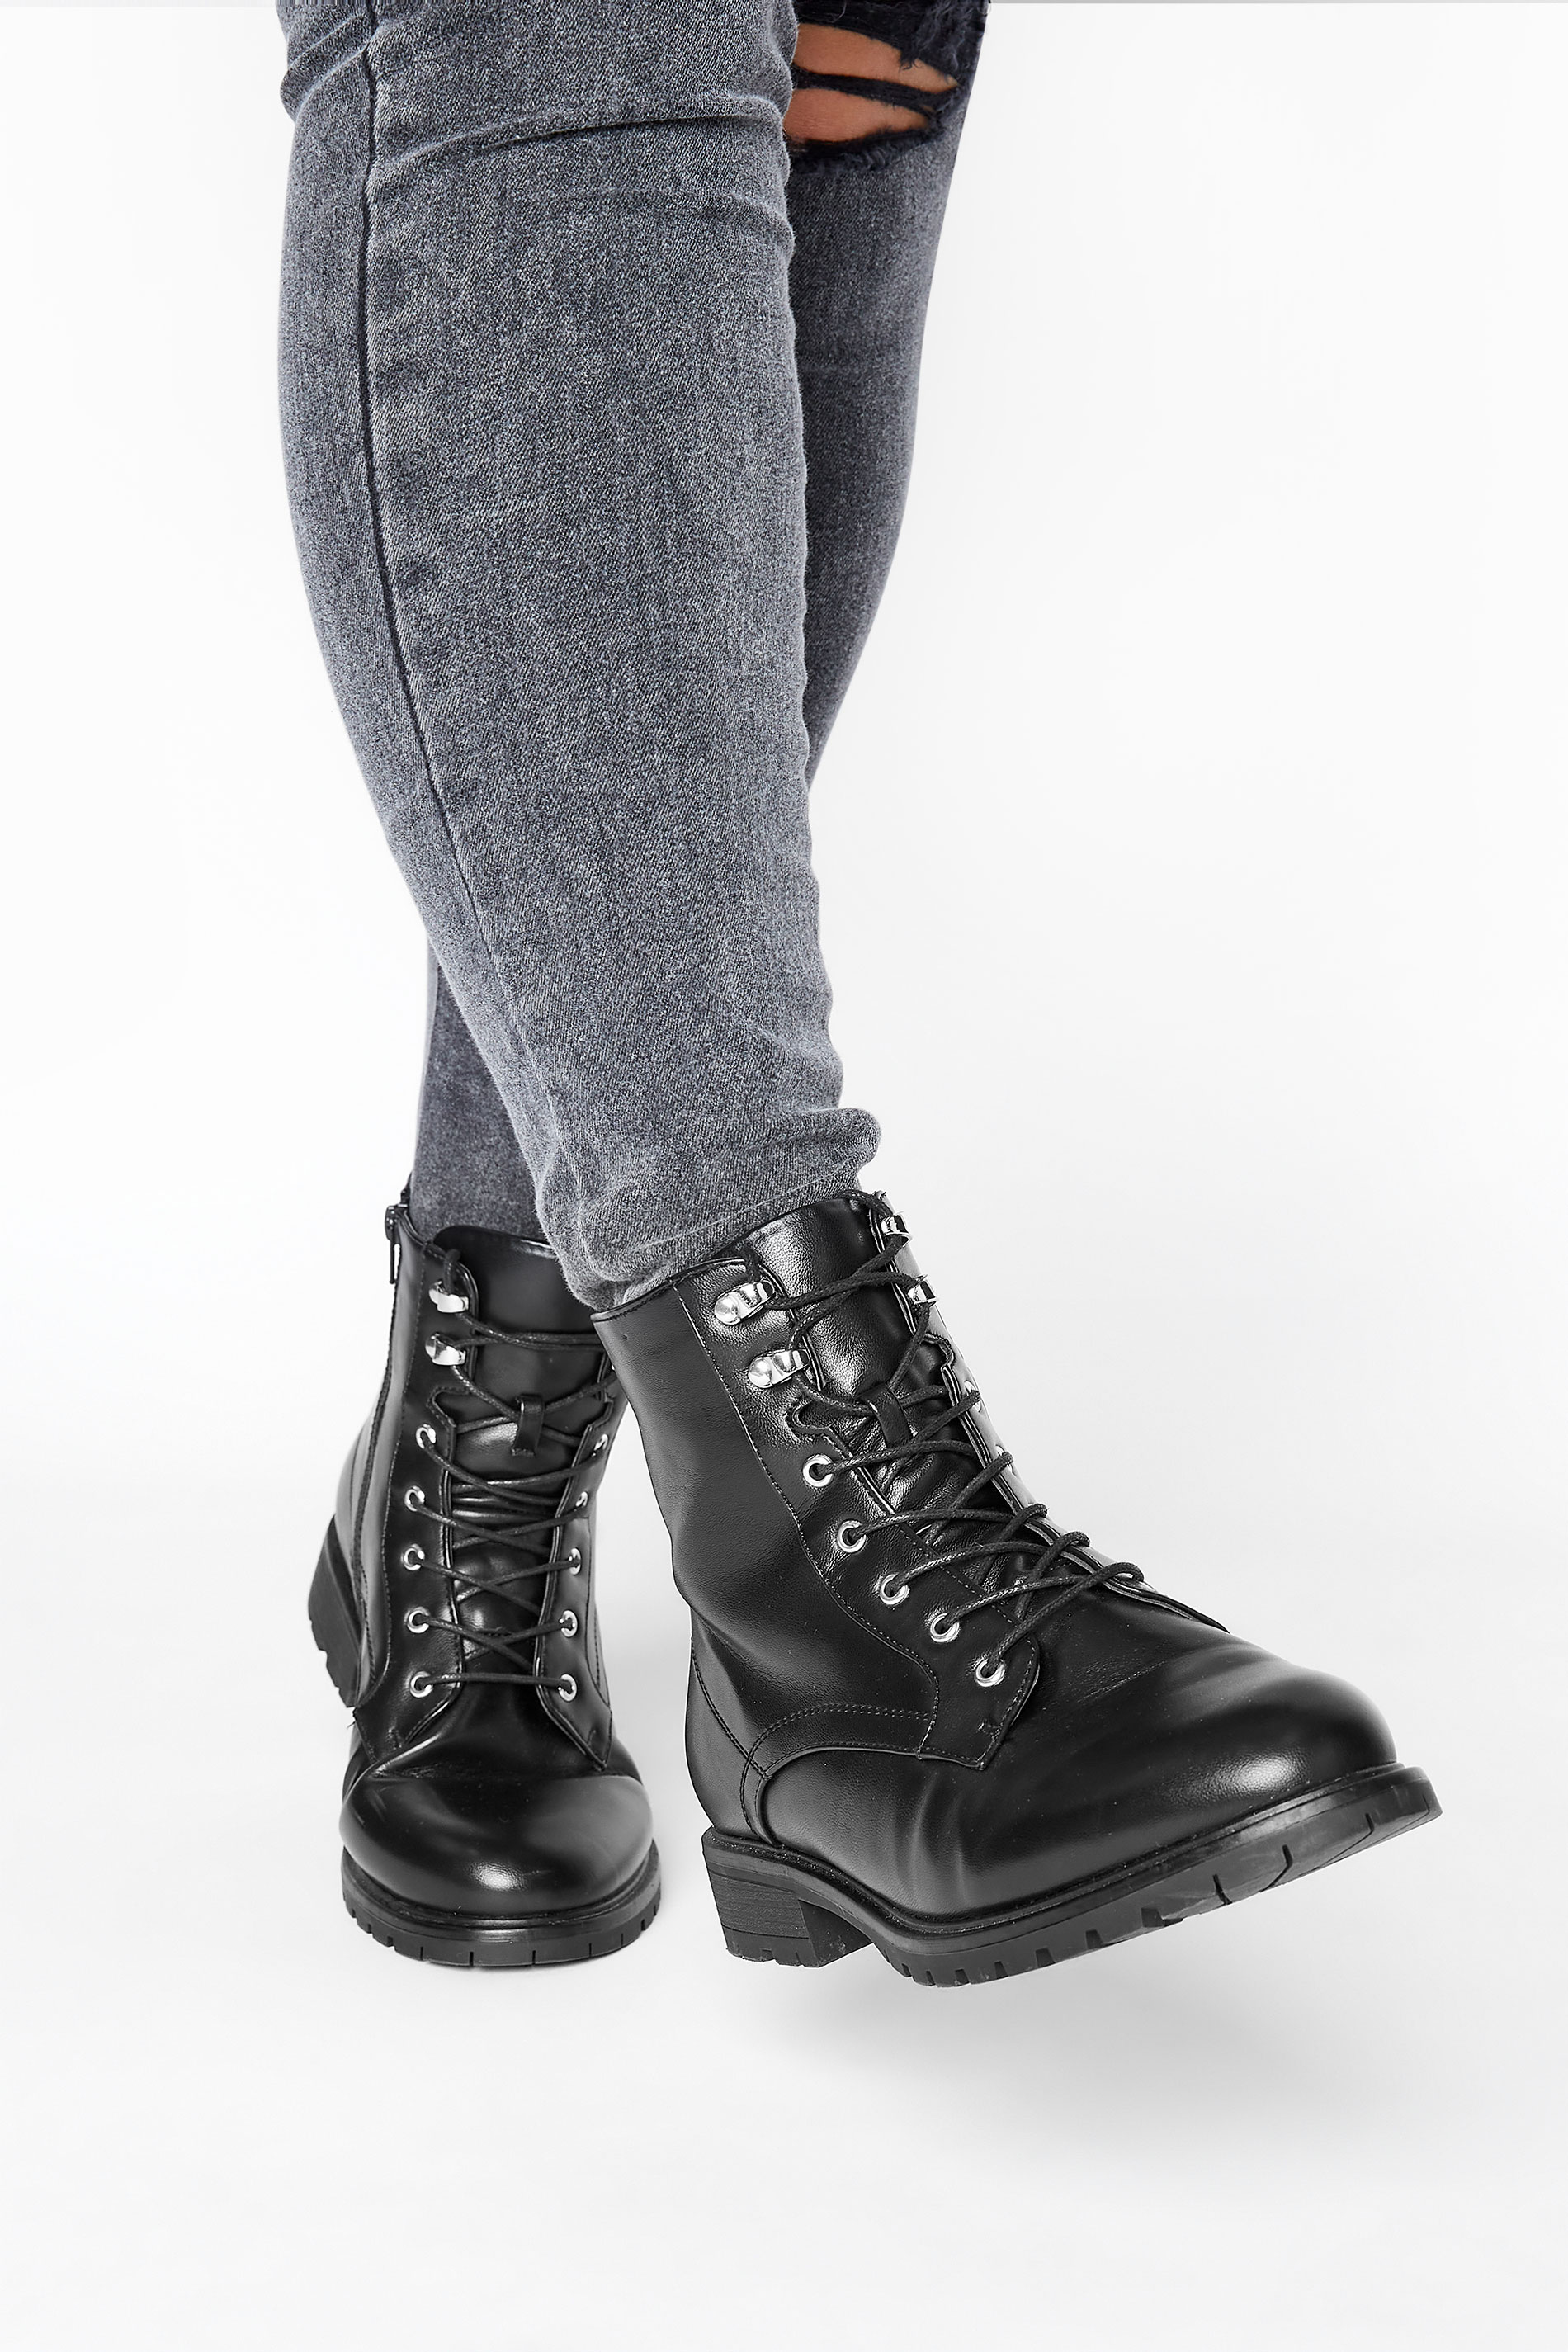 Black Vegan Faux Leather Lace Up Combat Boots In Extra Wide Fit